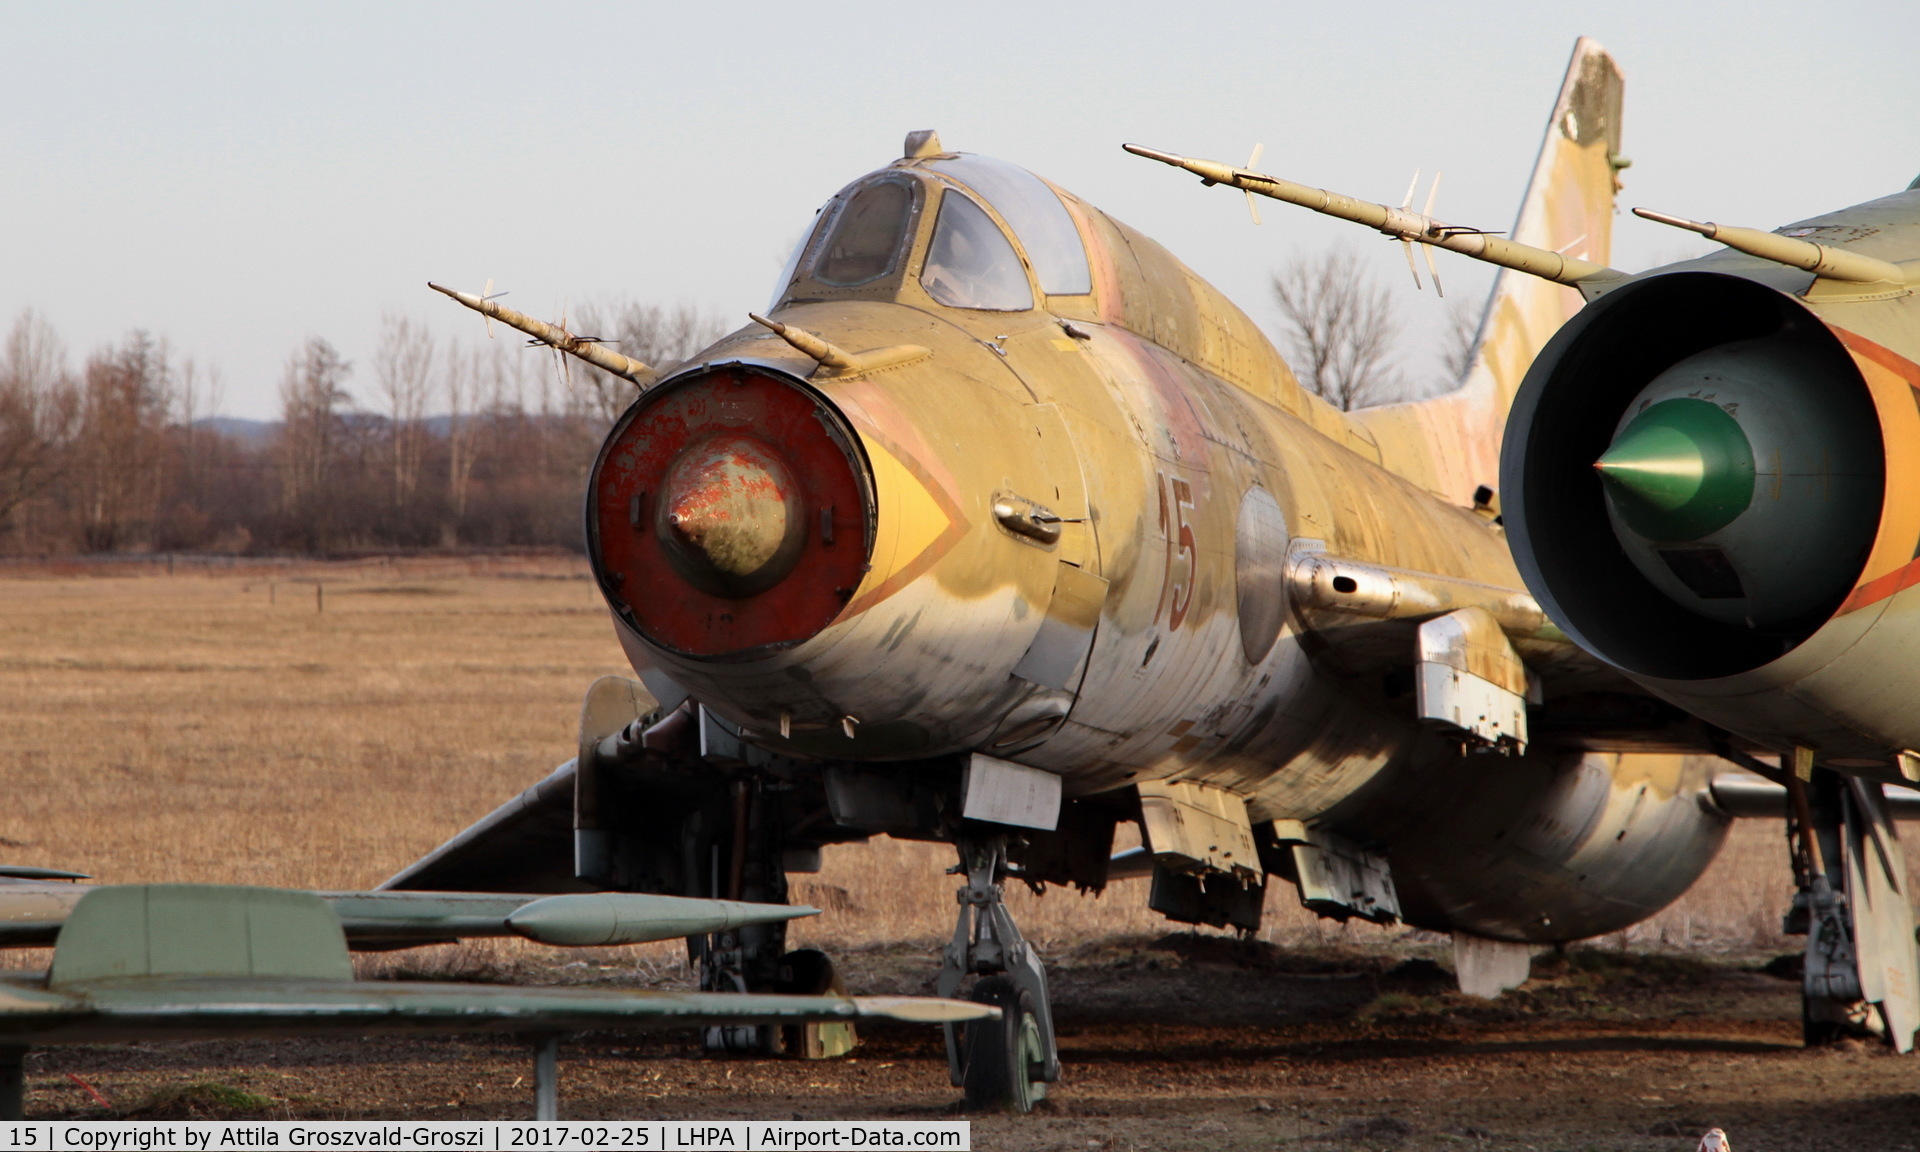 15, Sukhoi Su-22M-3 C/N 51815, Pápa stored off-site airport, Hungary